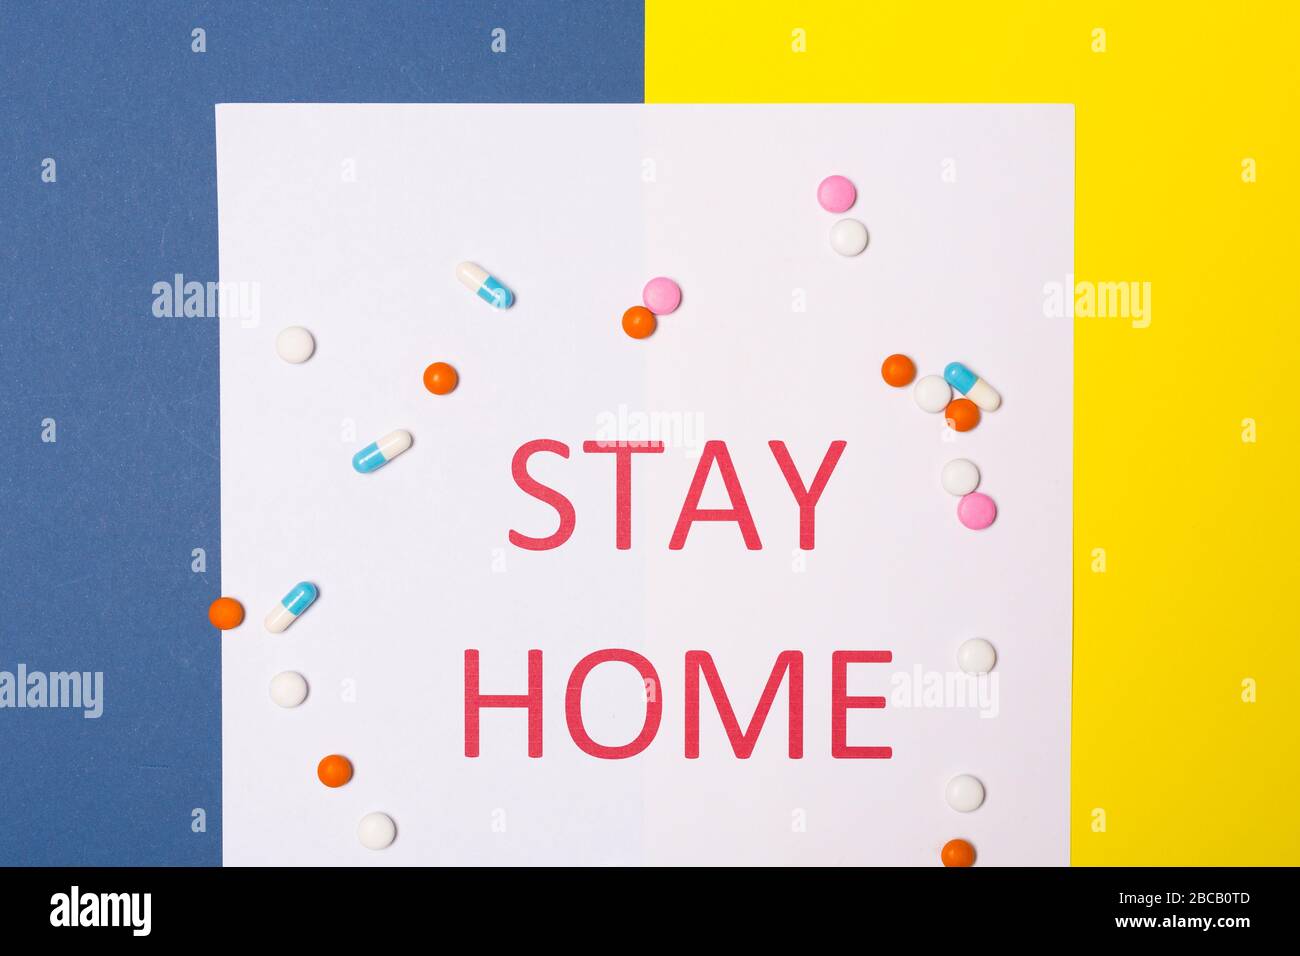 Words stay at home.Coronavirus Pandemic Protection Concept. Minimal concept. Stay safe, concept of self quarantine at home as preventative measure Stock Photo